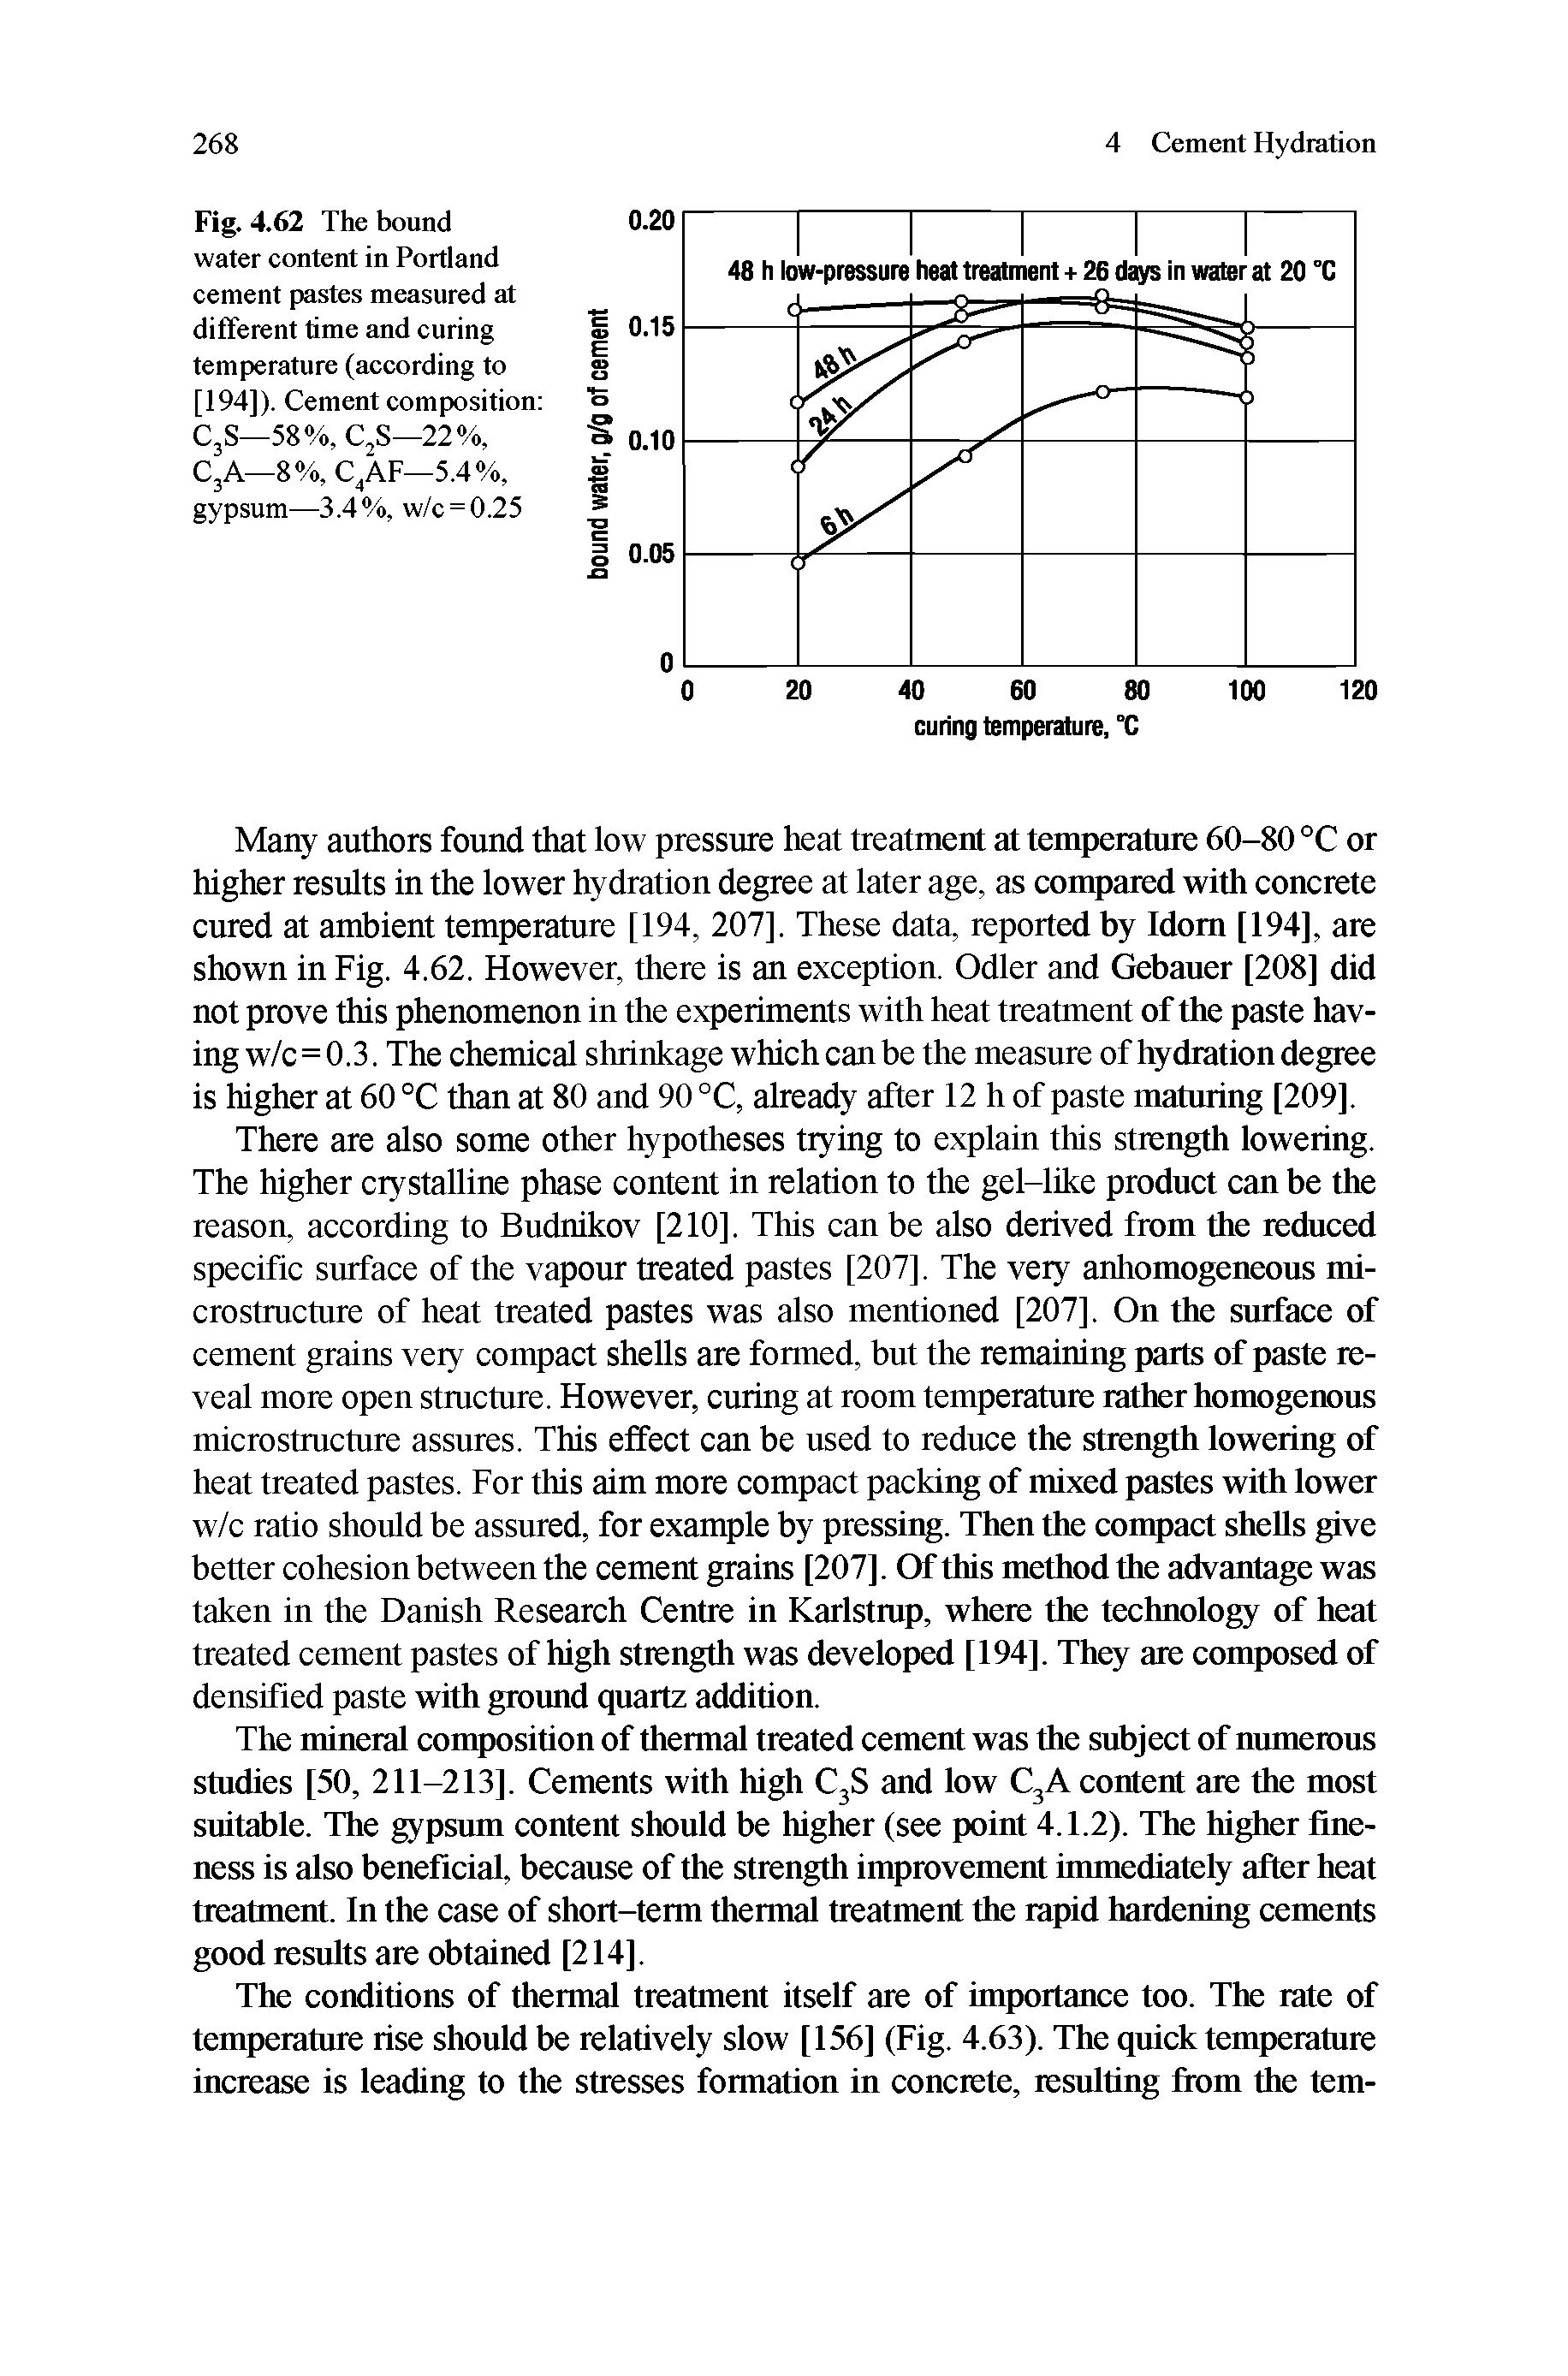 Fig. 4.62 The bound water content in Portland cement pastes measured at difTerent time and curing temperature (according to [194]). Cement composition C3S—58%, CjS—22%, C,A—8%, C,AF—5.4%, gypsum—3.4%, w/c = 0.25...